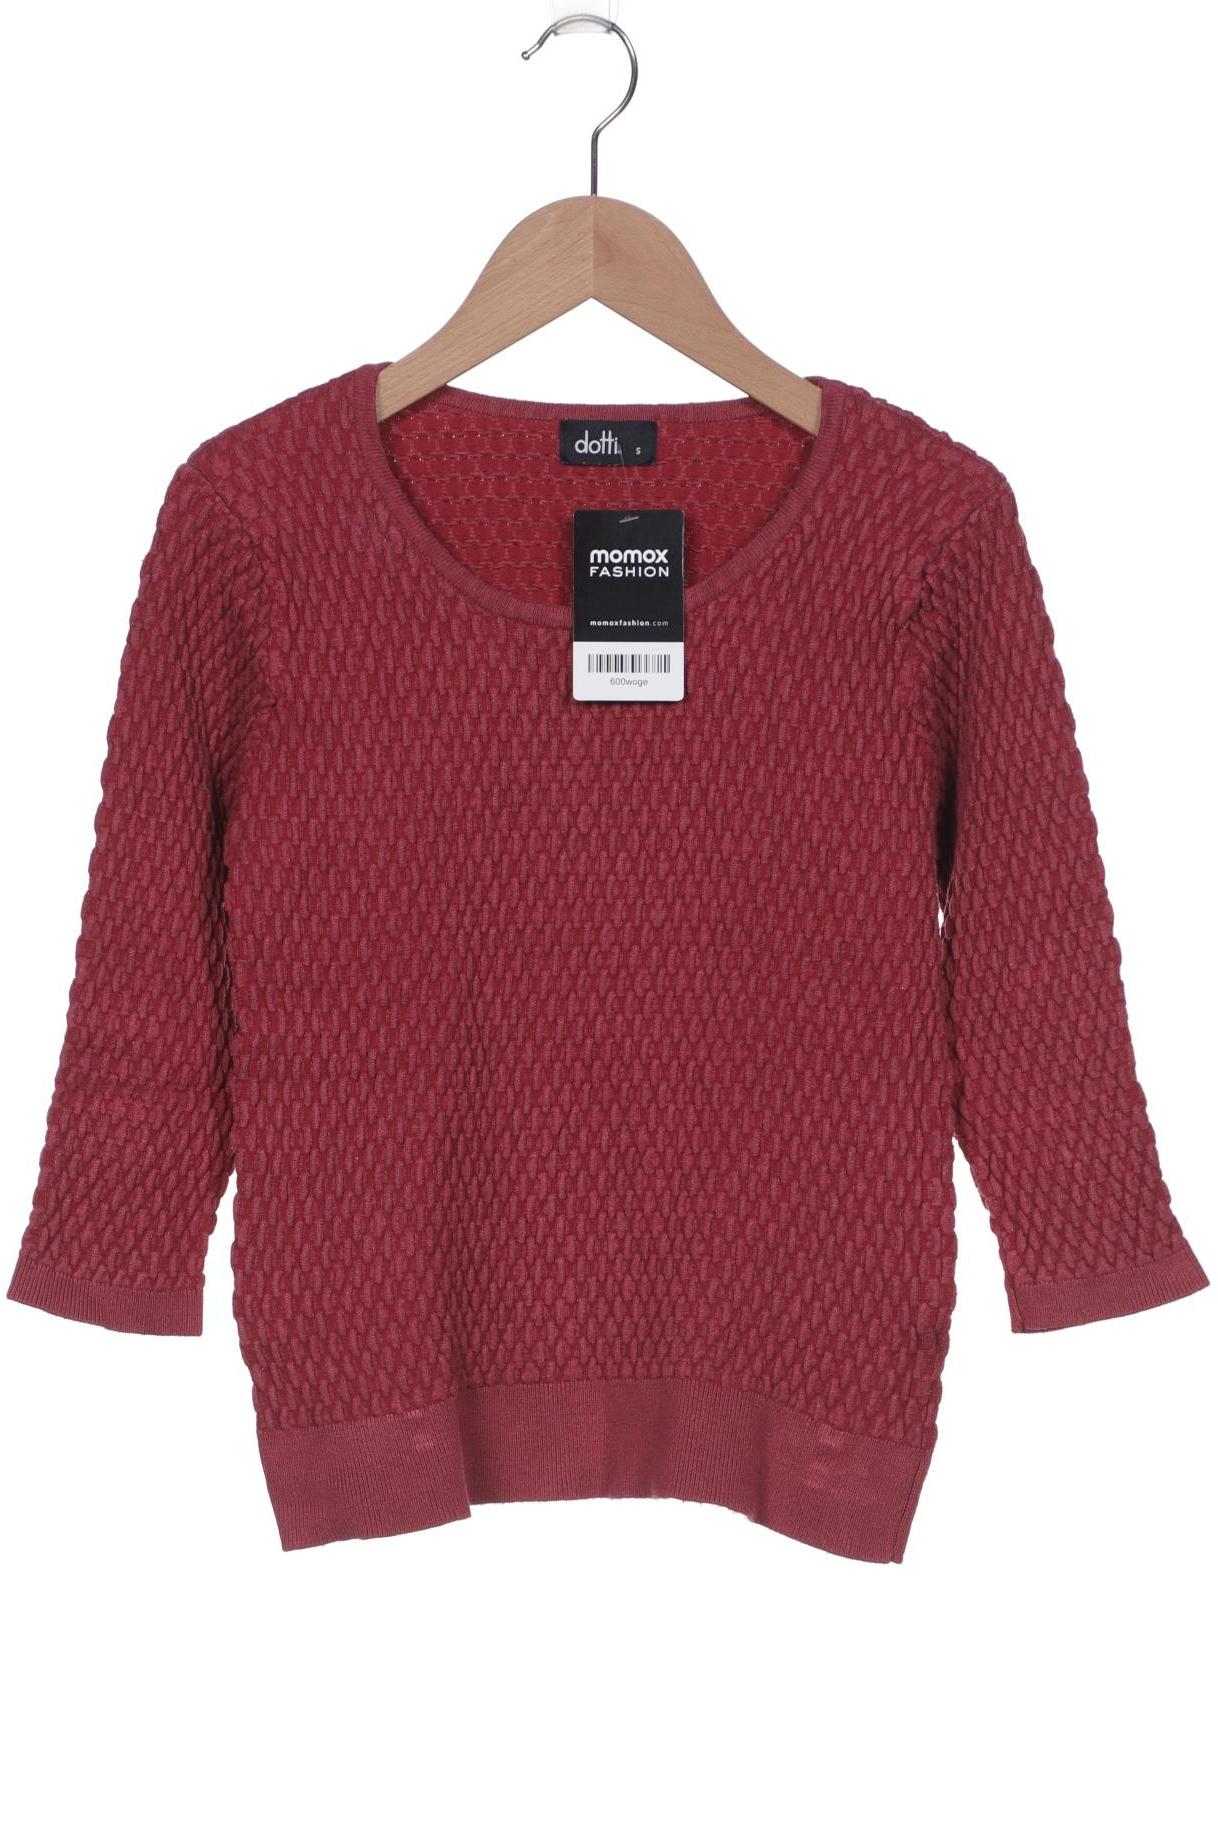 Dolly and Dotty Damen Pullover, rot von dolly and dotty